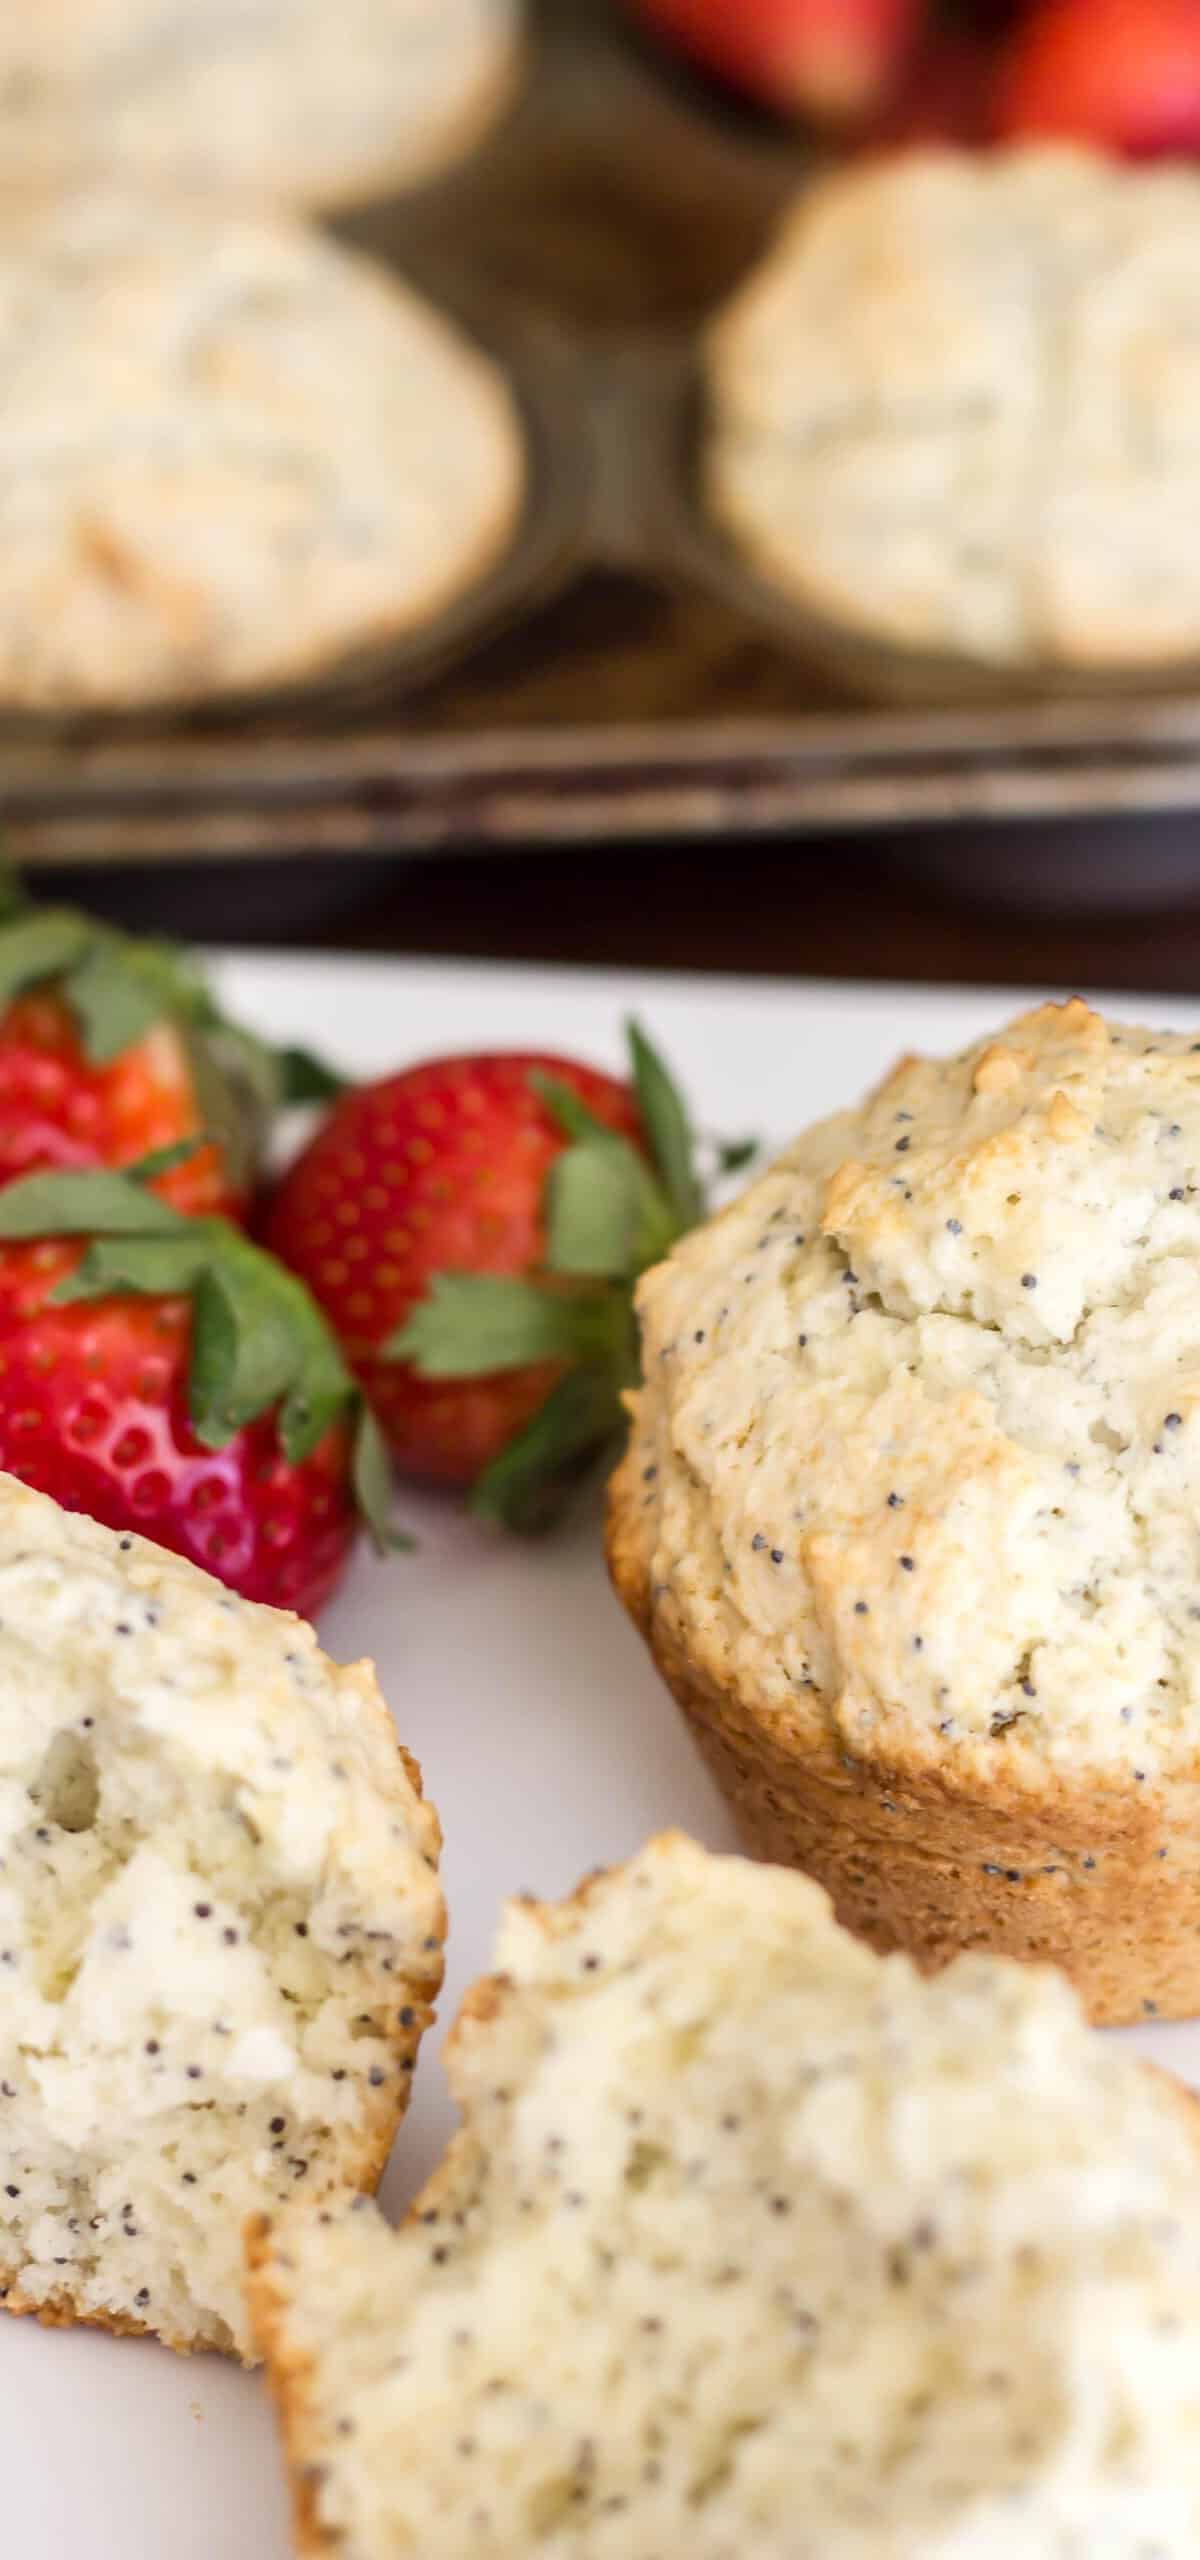  These muffins are jam-packed with different flavors and textures